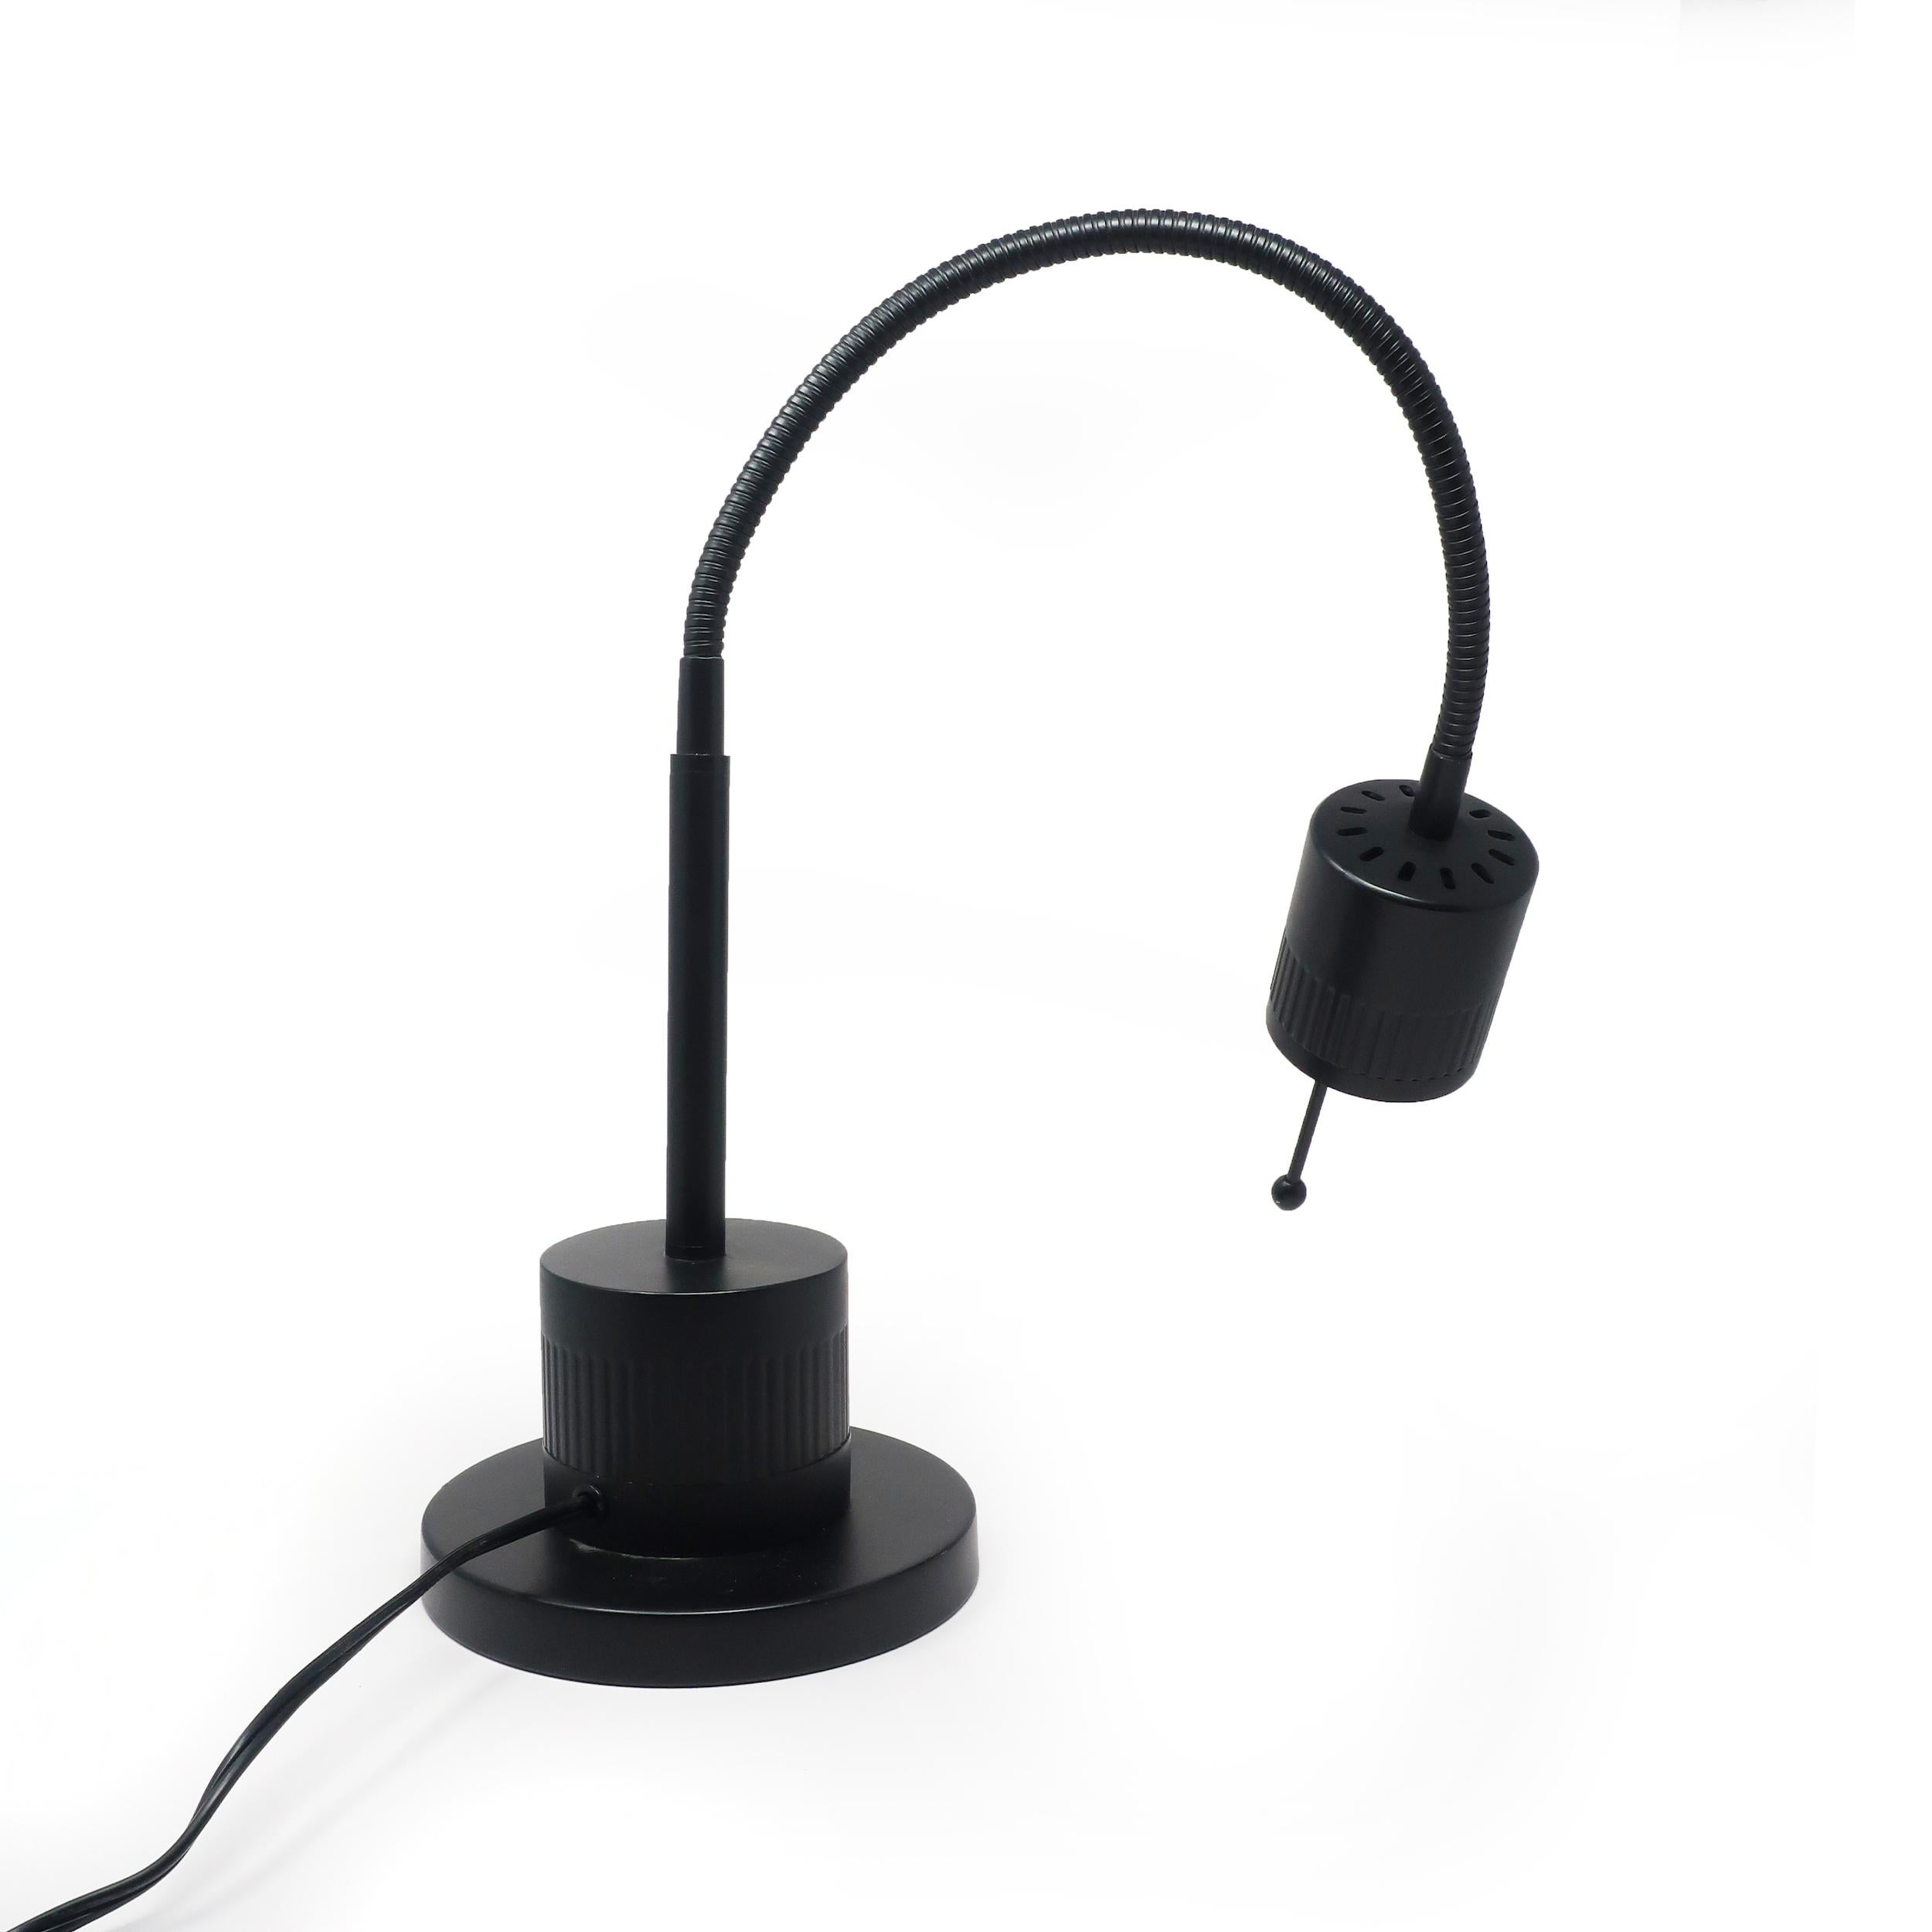 A Tensor gooseneck desk lamp that is perfect for a minimalist or 1980s inspired home or office. Round black metal base, gooseneck stem, shade with halogen lamp, and on/off switch on the shade. In good condition with a few small marks consistent with